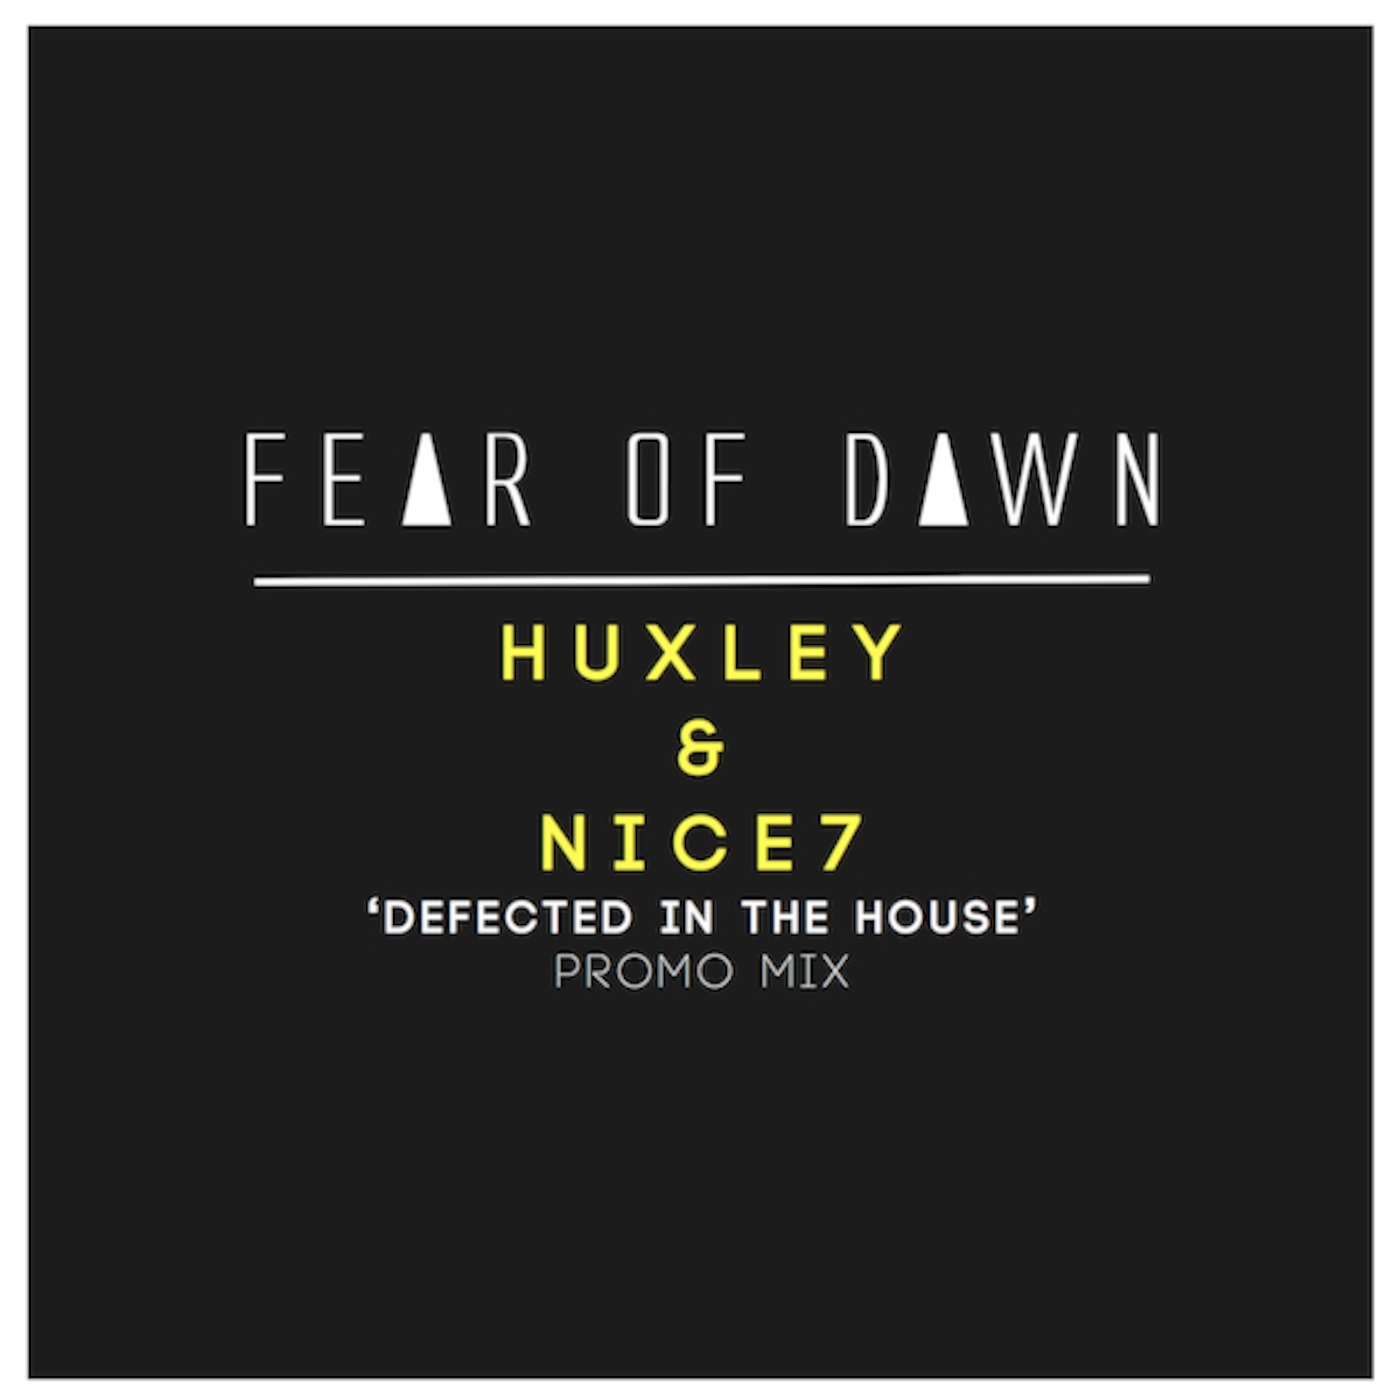 Defected Presents Huxley & NiCe7 (Fear of Dawn as one of the Escape Dj's Promo Mix)